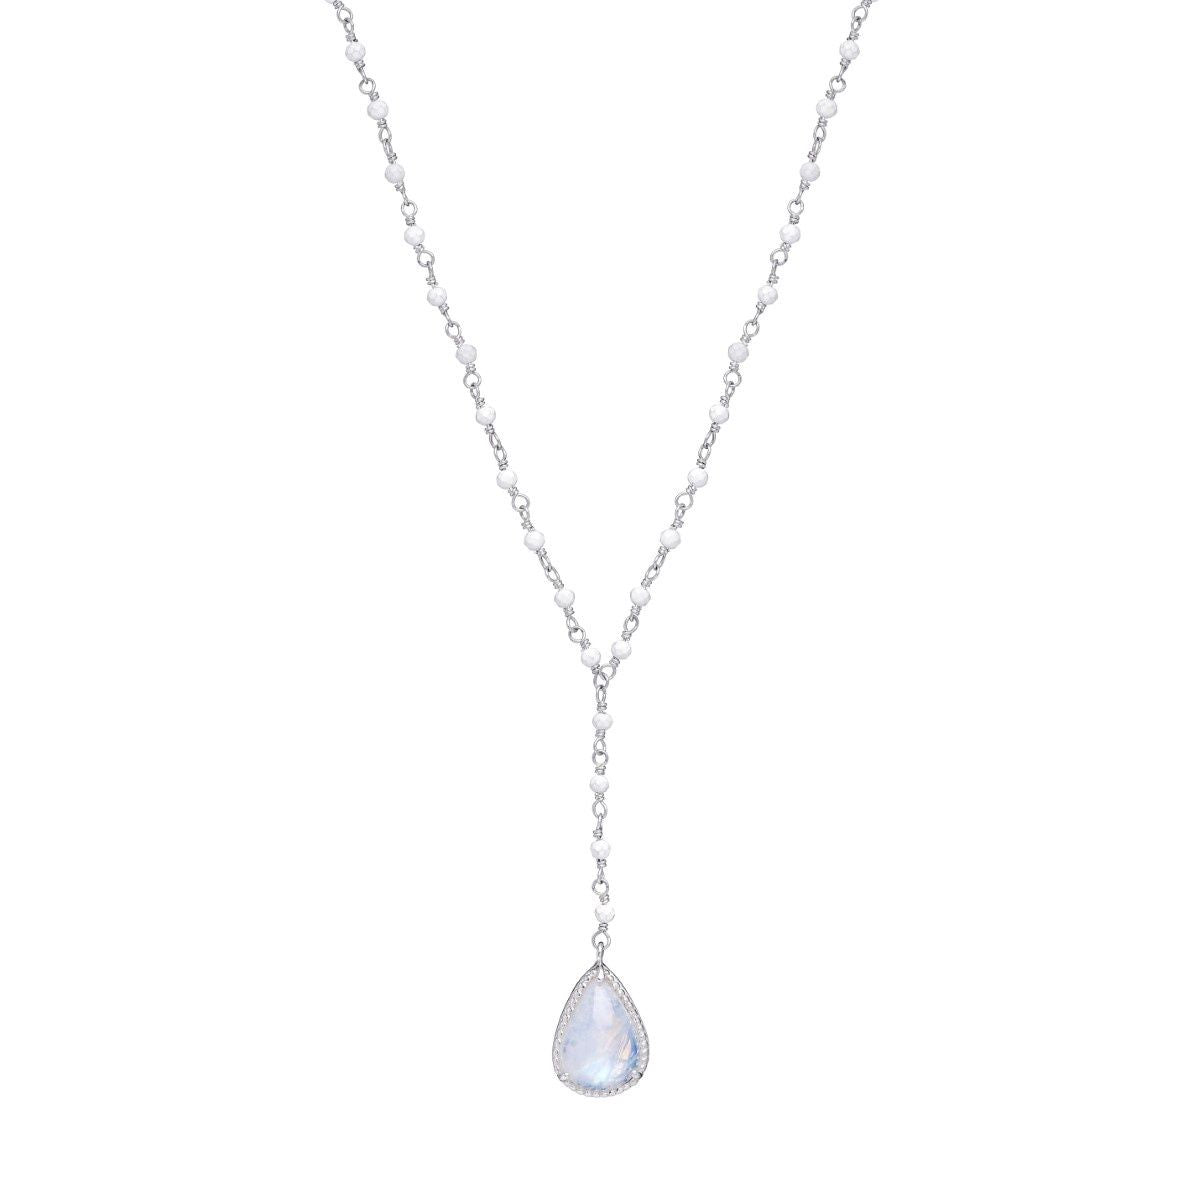 Annie Haak Moonstone Long Silver Necklace